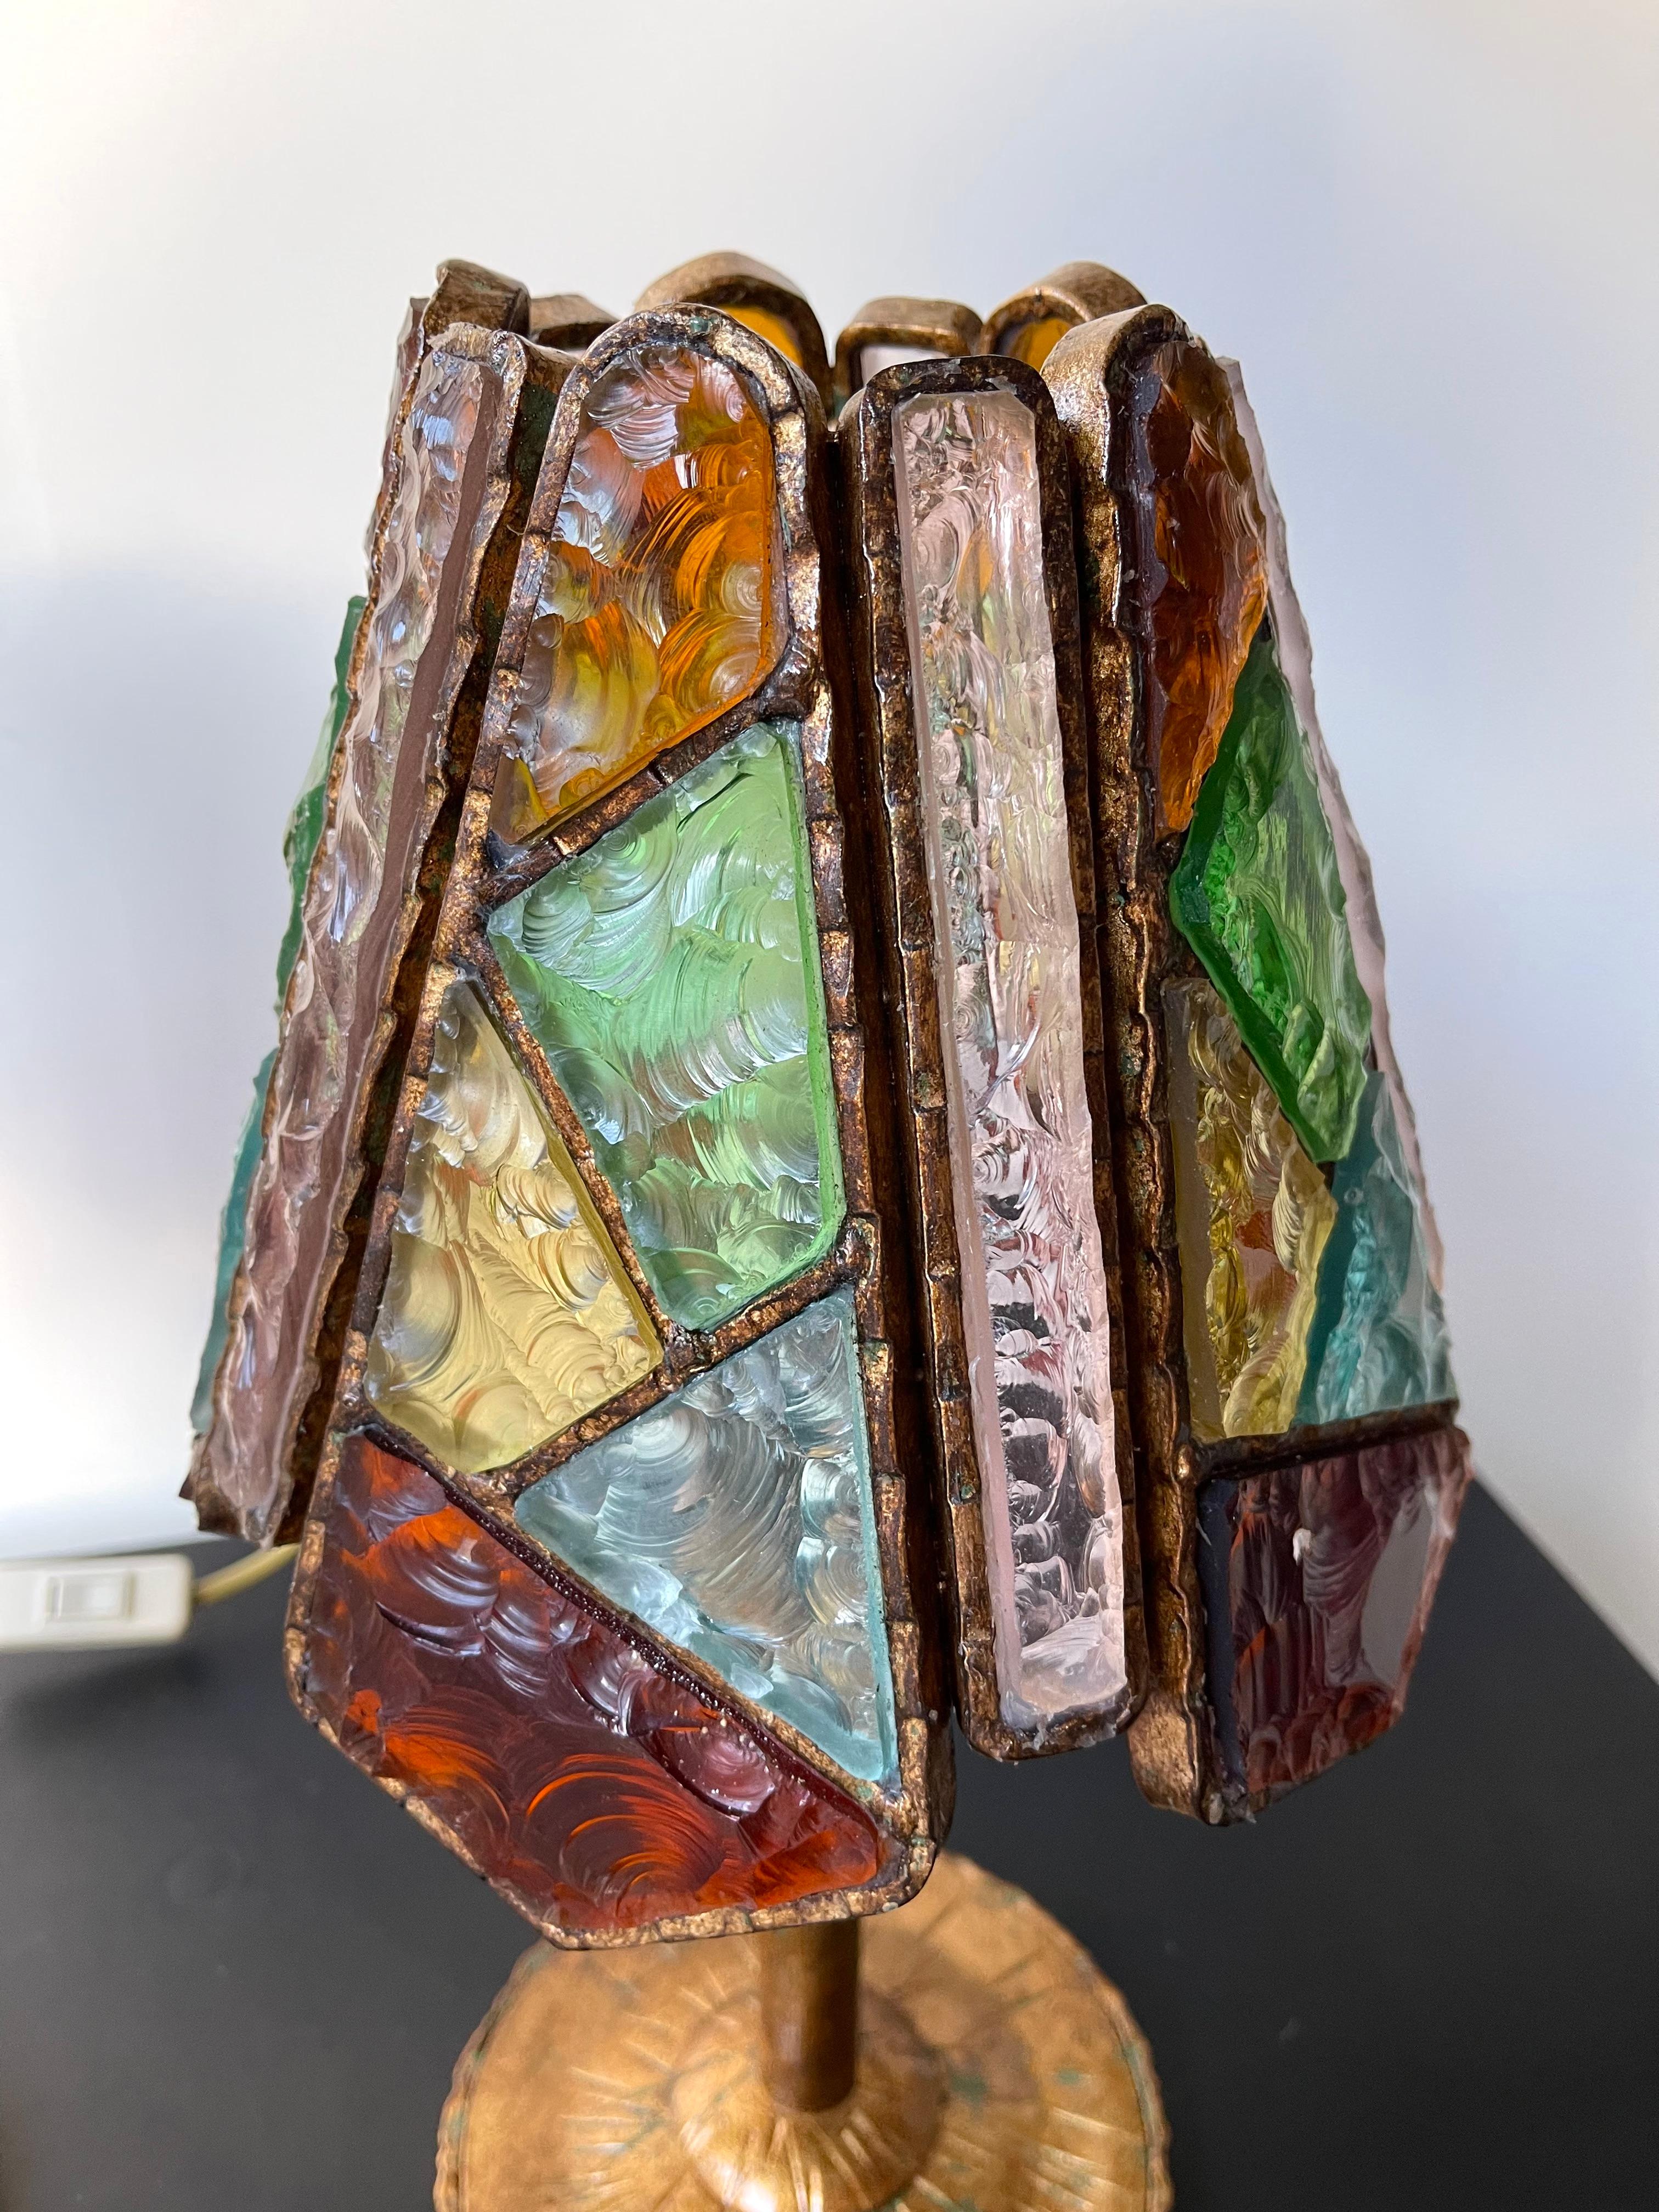 Brutalist Pair of Hammered Glass Wrought Iron Lamps by Longobard, Italy, 1970s For Sale